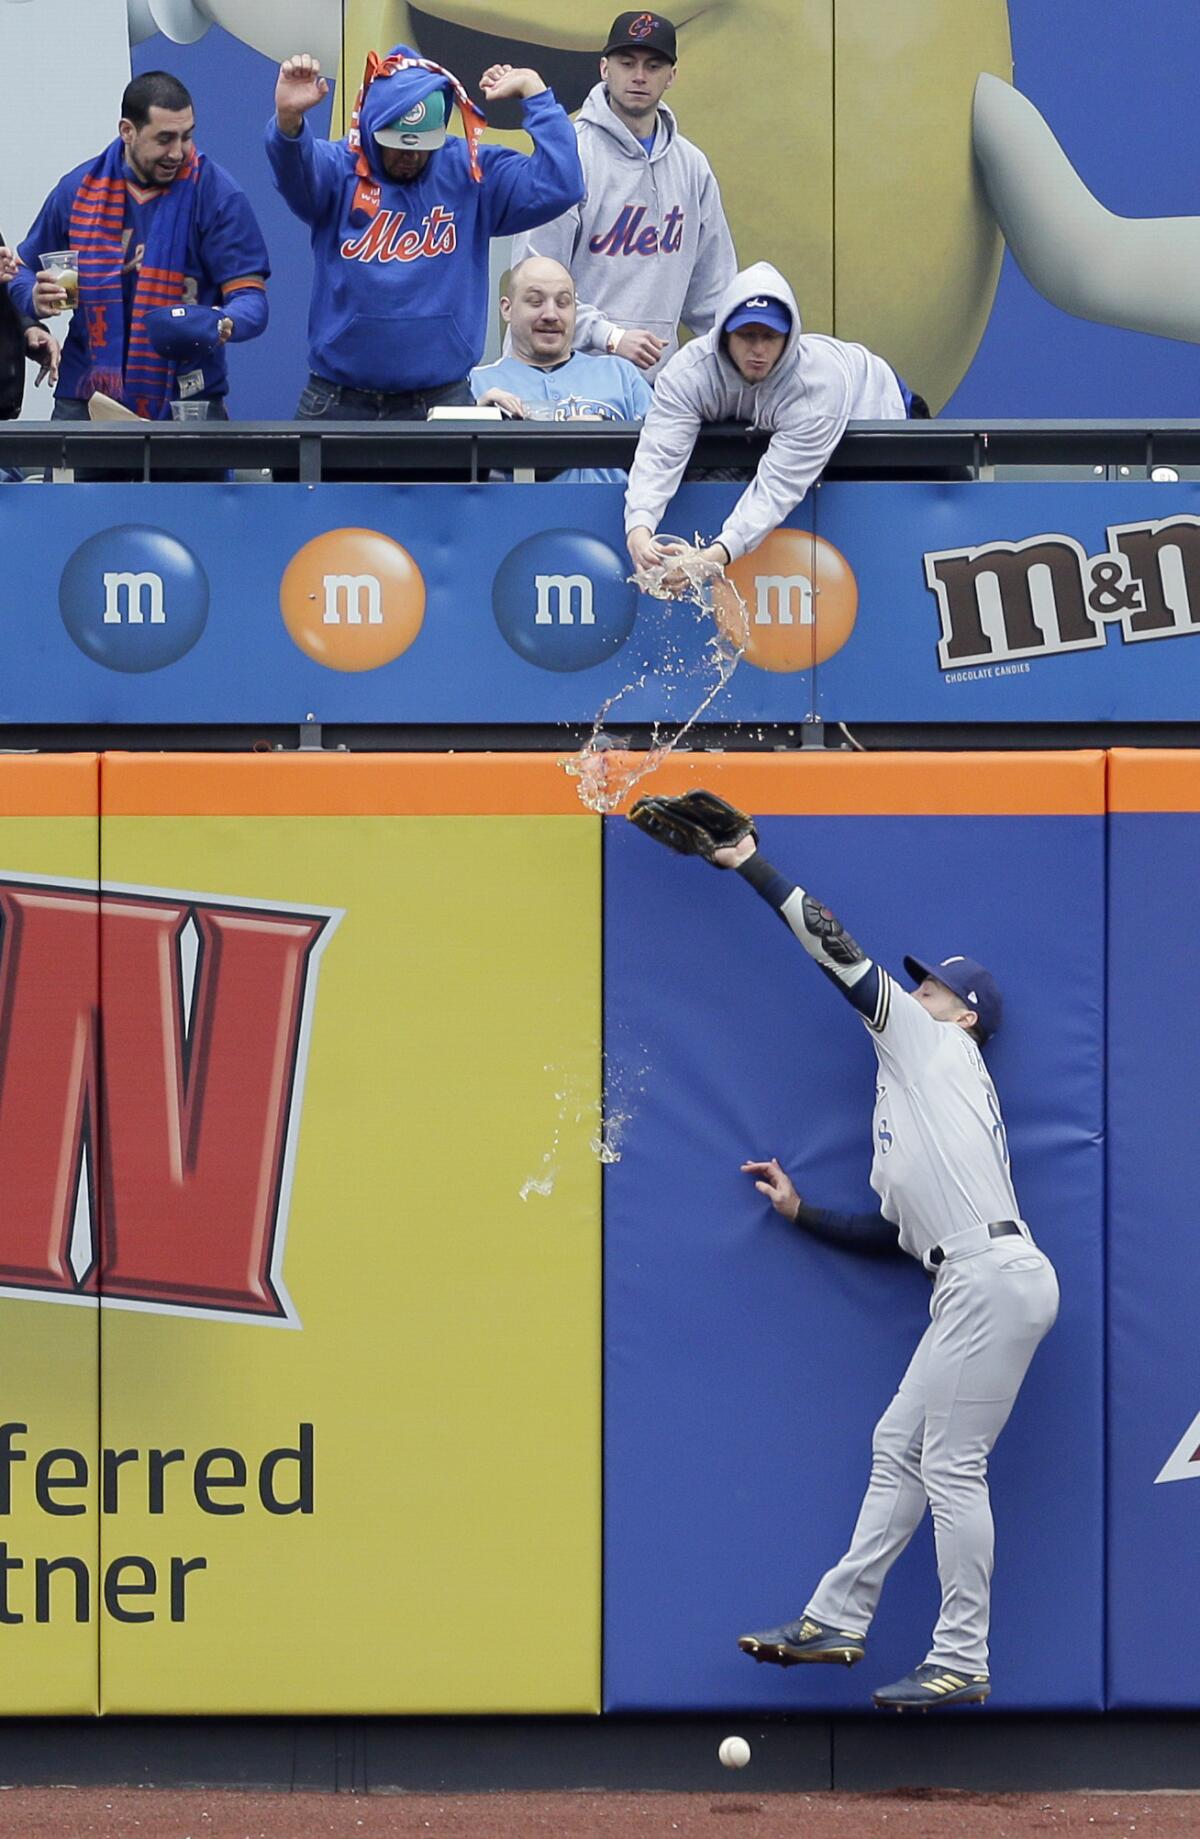 A fan spills beer on the Brewers' Ryan Braun as the left fielder tries but fails to grab a fly ball hit by the Mets' Pete Alonso on Sunday at Citi Field.